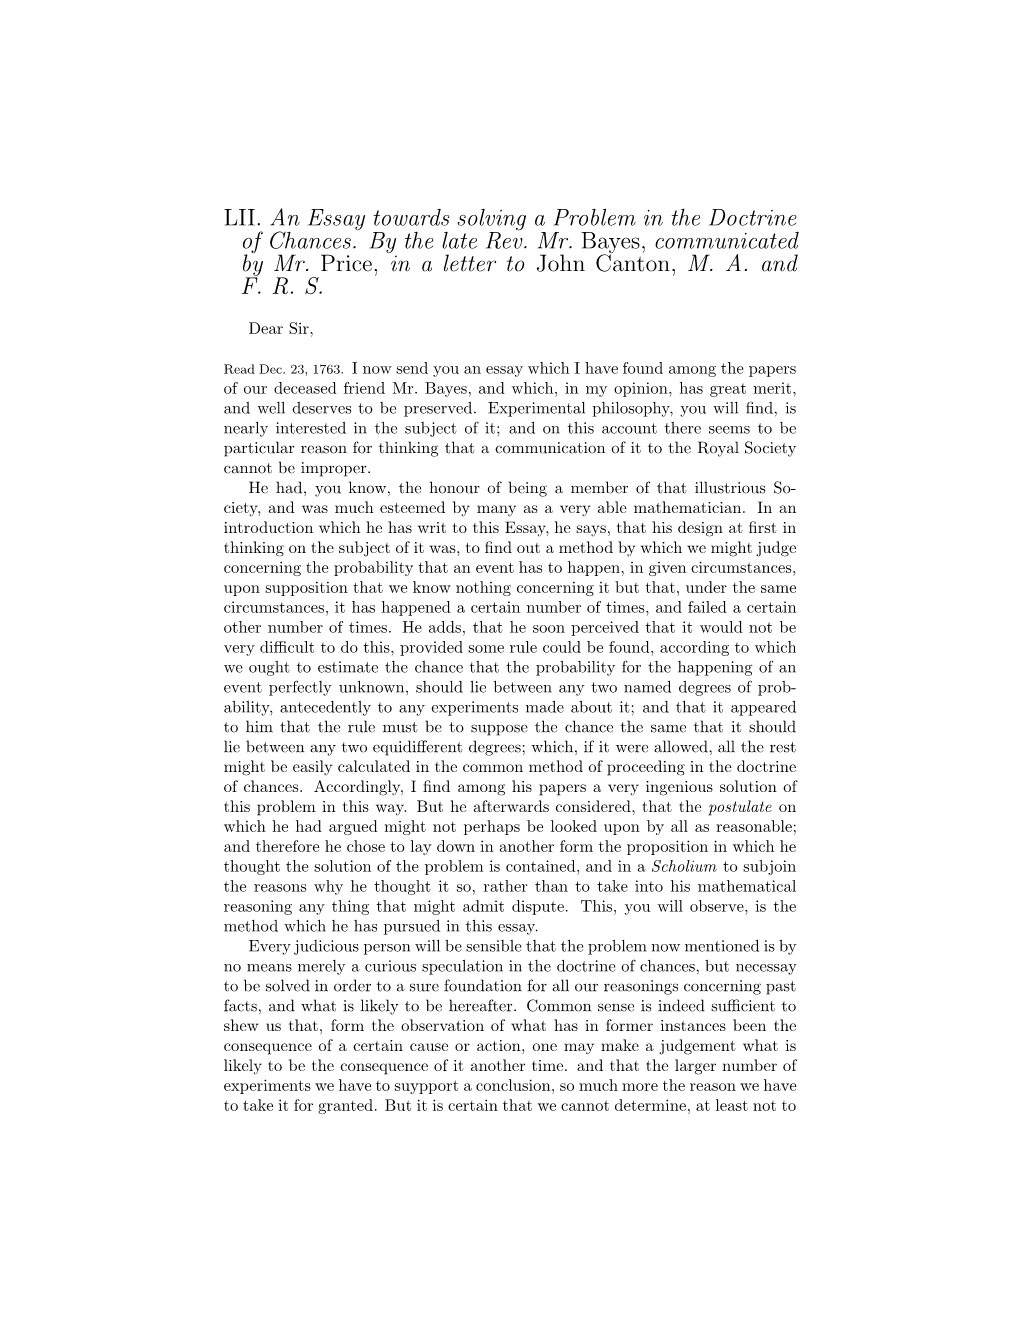 LII. an Essay Towards Solving a Problem in the Doctrine of Chances. by the Late Rev. Mr. Bayes, Communicated by Mr. Price, in a Letter to John Canton, M